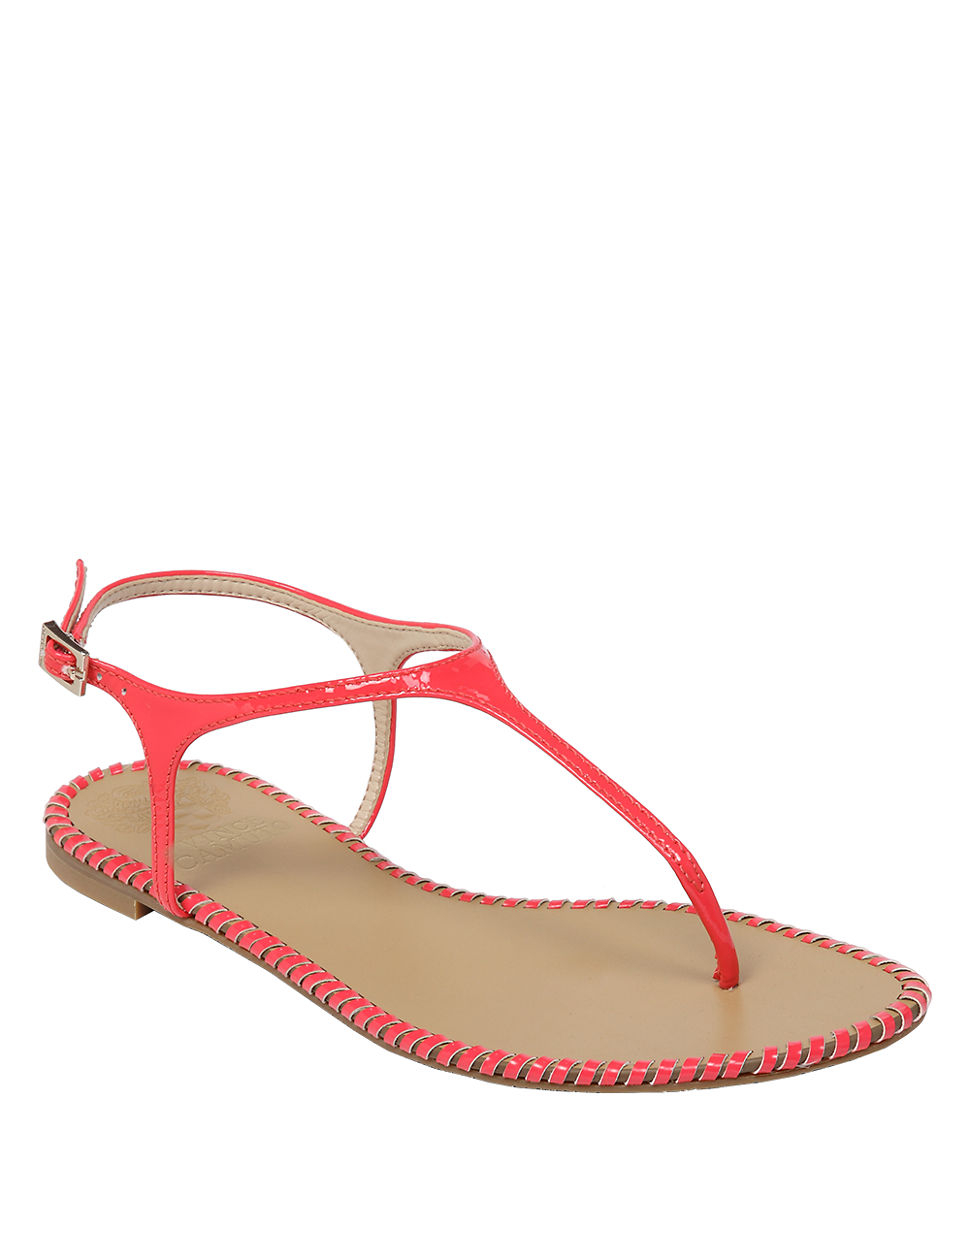 Vince Camuto Adrelin Patent Leather Sandals in Pink | Lyst